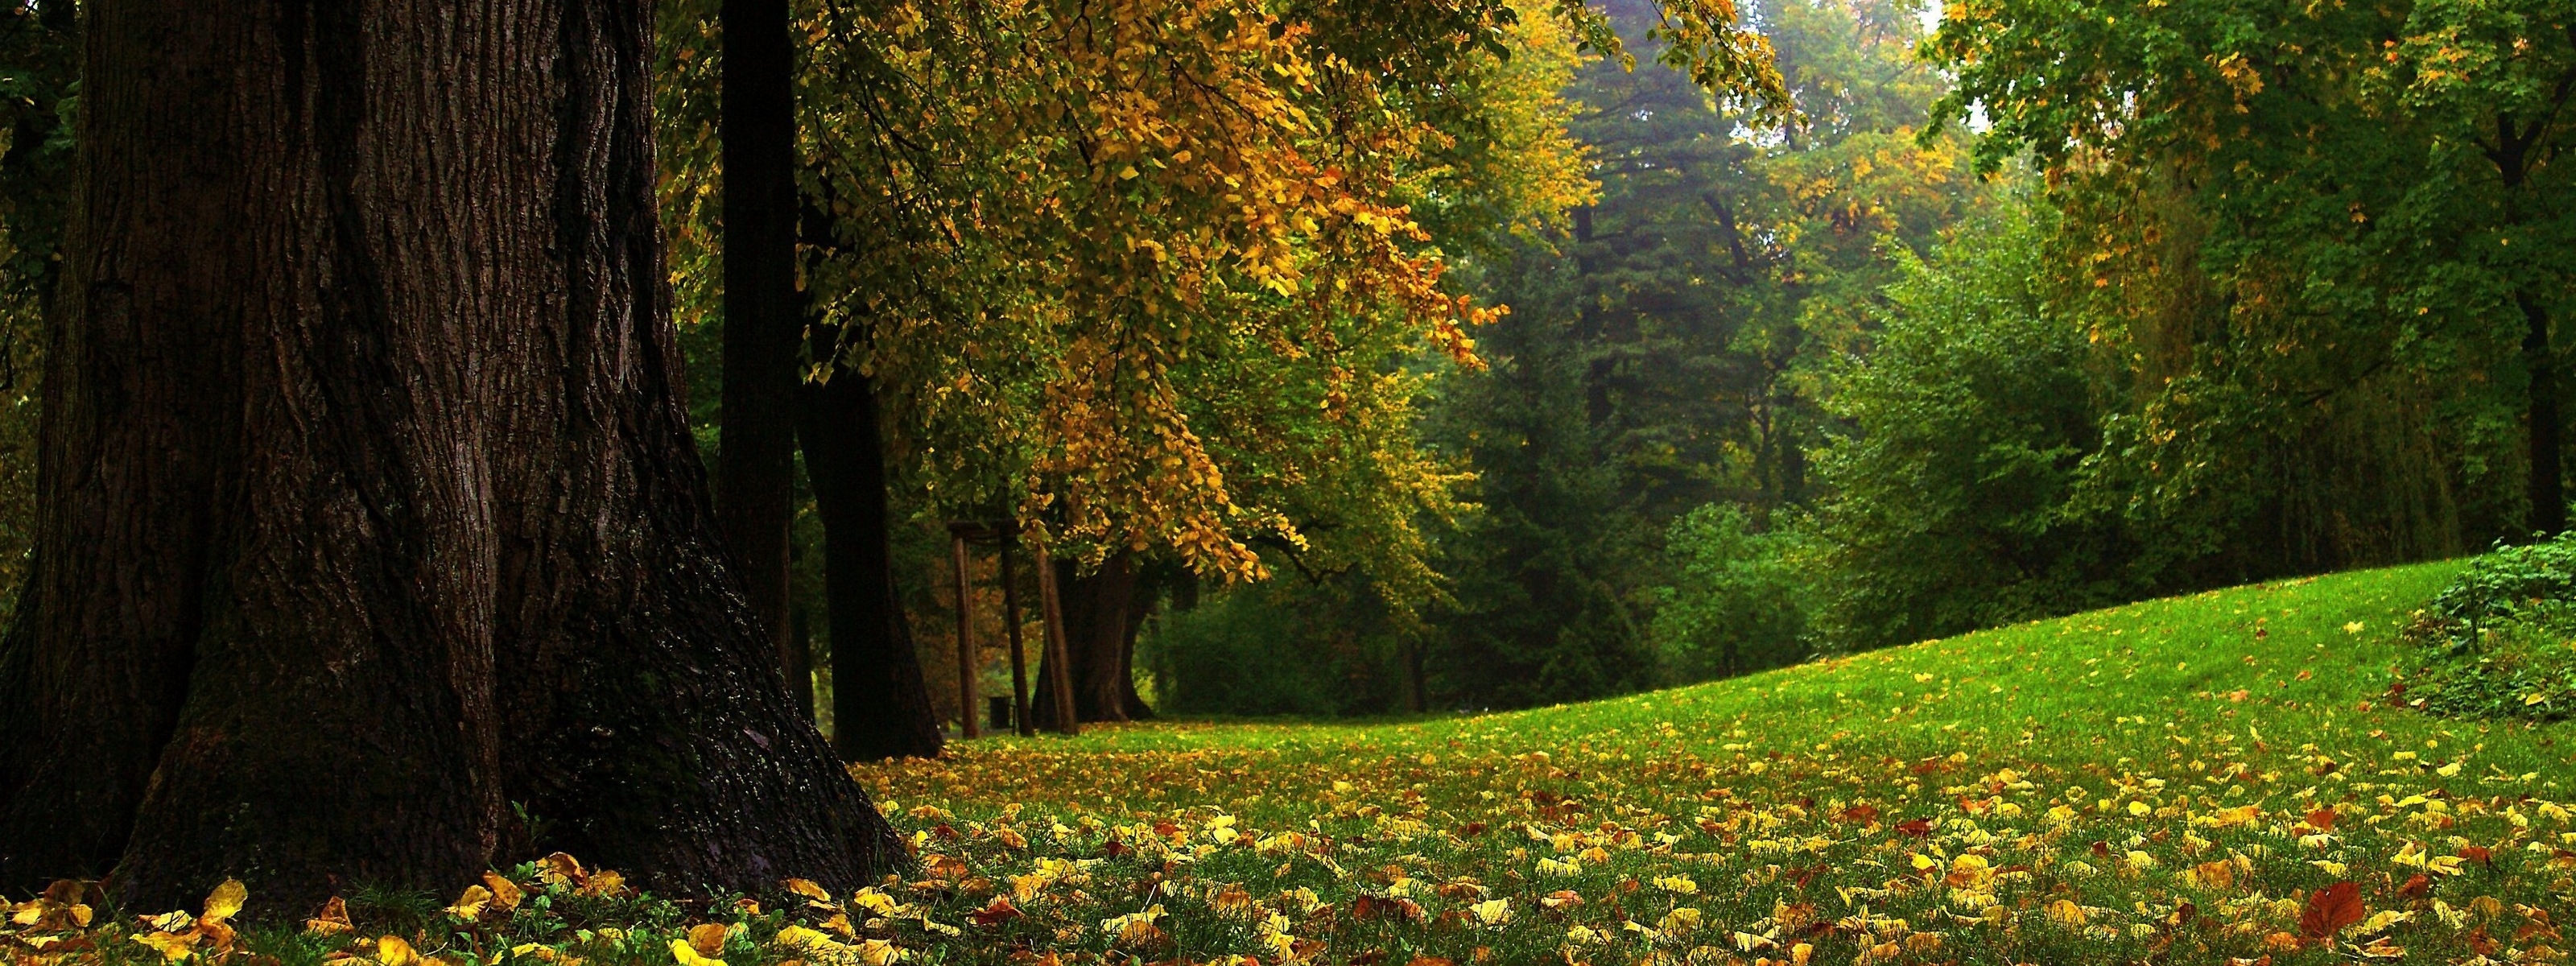 Download wallpaper 3200x1200 tree trunk mighty panorama september hd  background